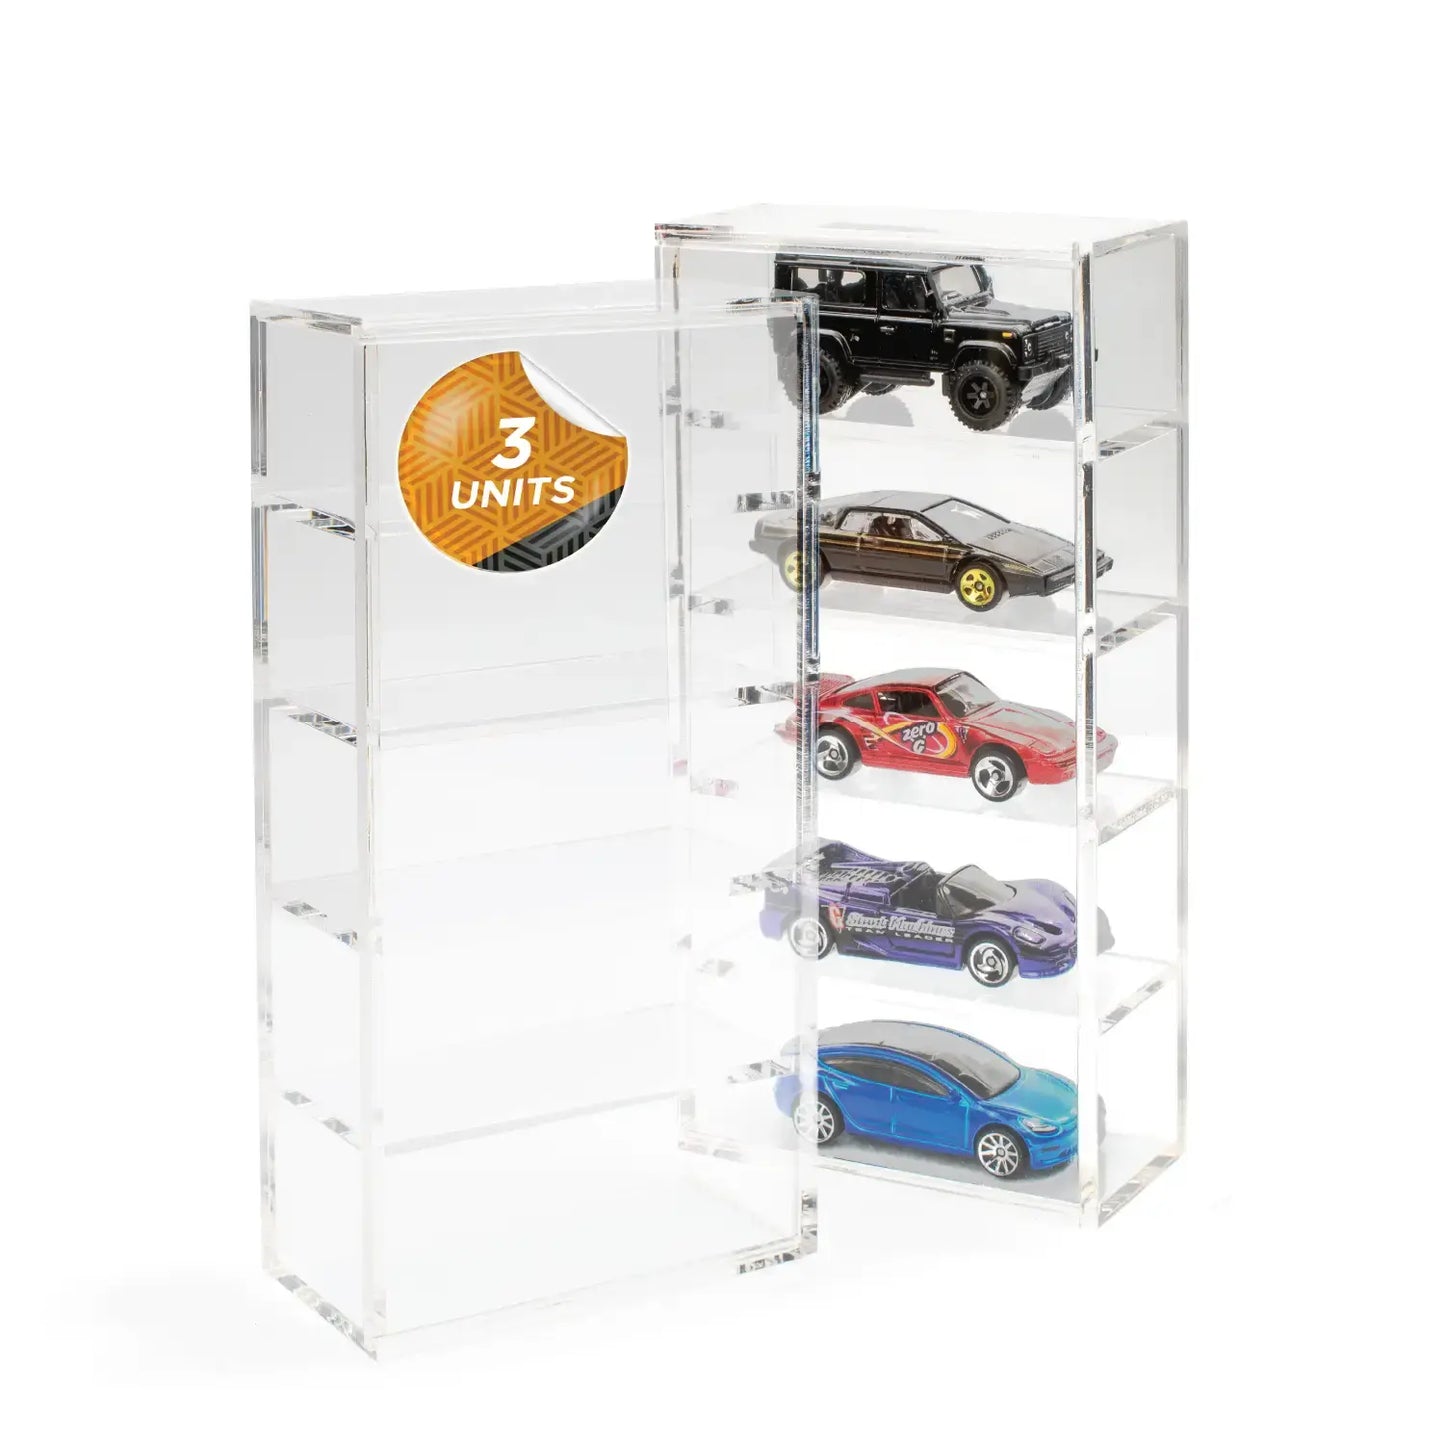 Acrylic Protector Box with Five Heights Compatible with Loose Hot Wheels - 1:64 scale cars with a maximum height of 34mm - The Ultimate Protection for Your Best Collectibles. - Friki Monkey